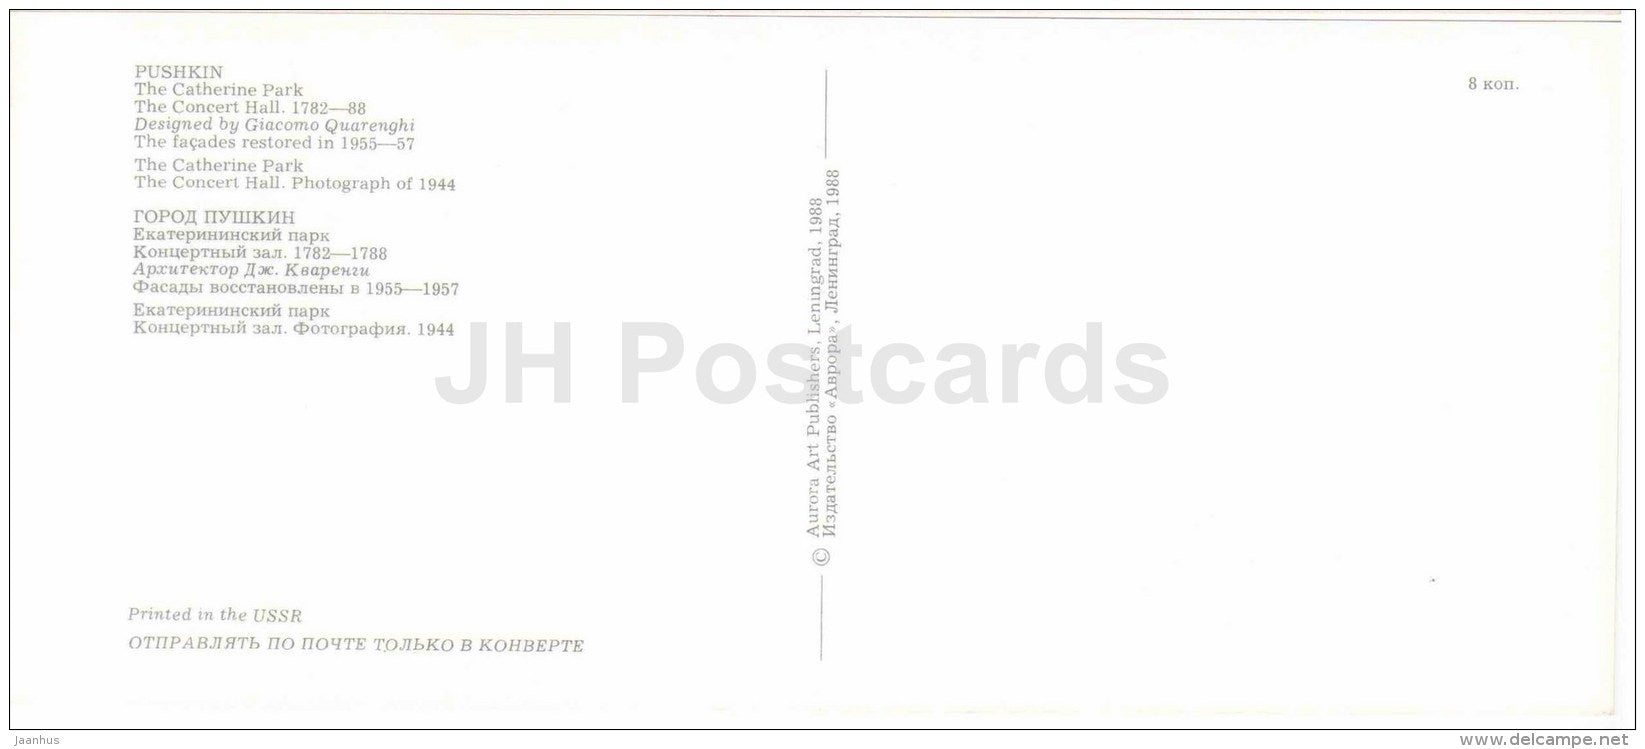 The Concert Hall - Catherine Park - Pushkin , Risen from Ashes - 1988 - Russia USSR - unused - JH Postcards